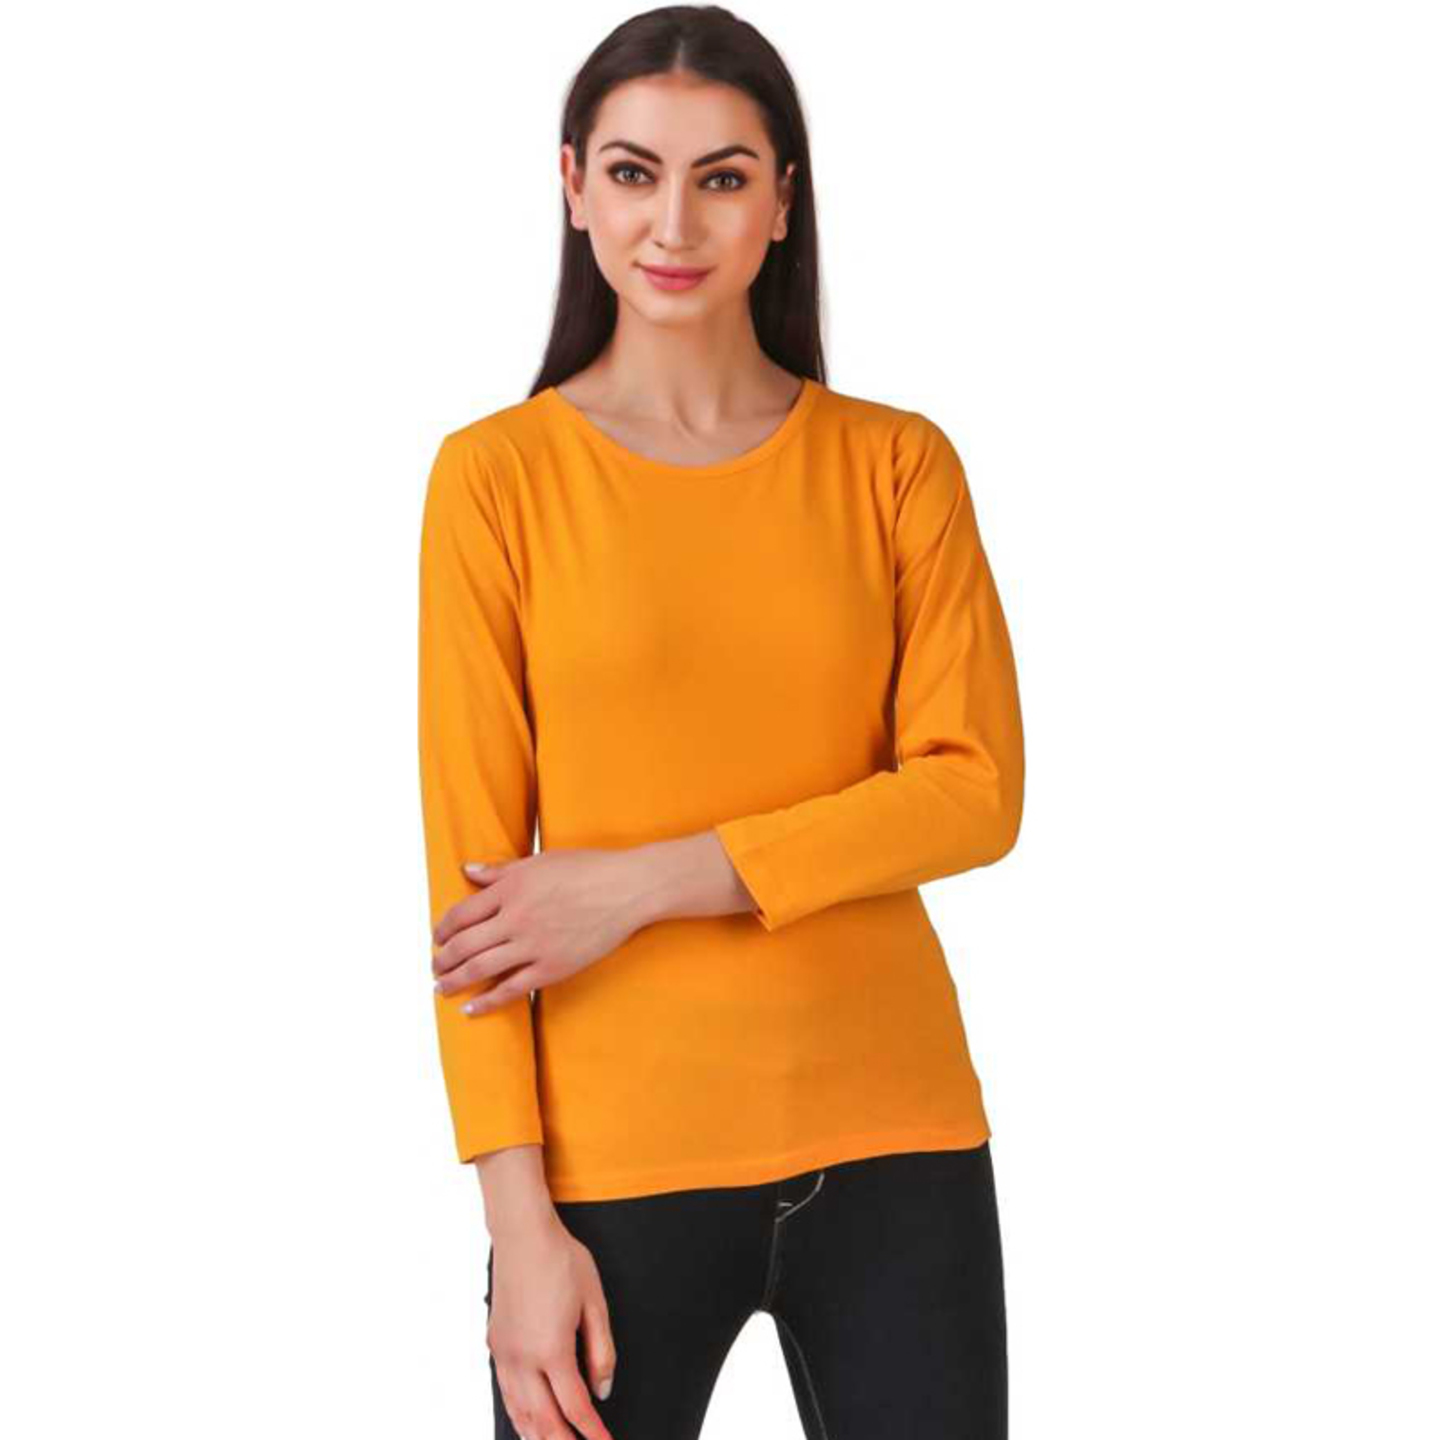 Paretto Yellow Full Sleeves Cotton T-shirt for Women